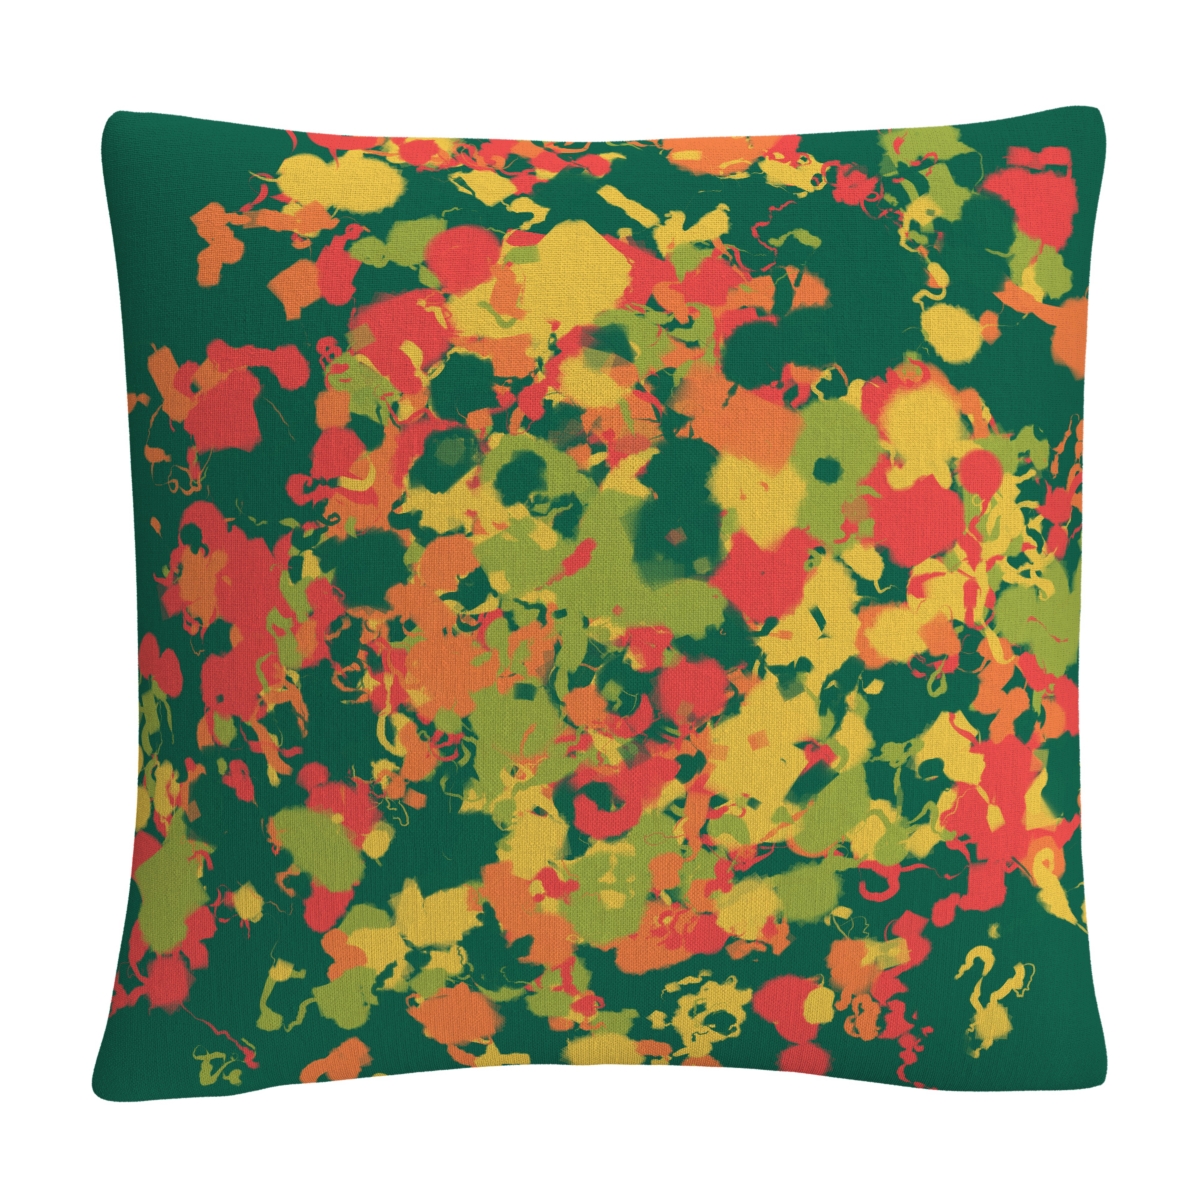 Abc Speckled Colorful Splatter Abstract 4Decorative Pillow, 16 x 16